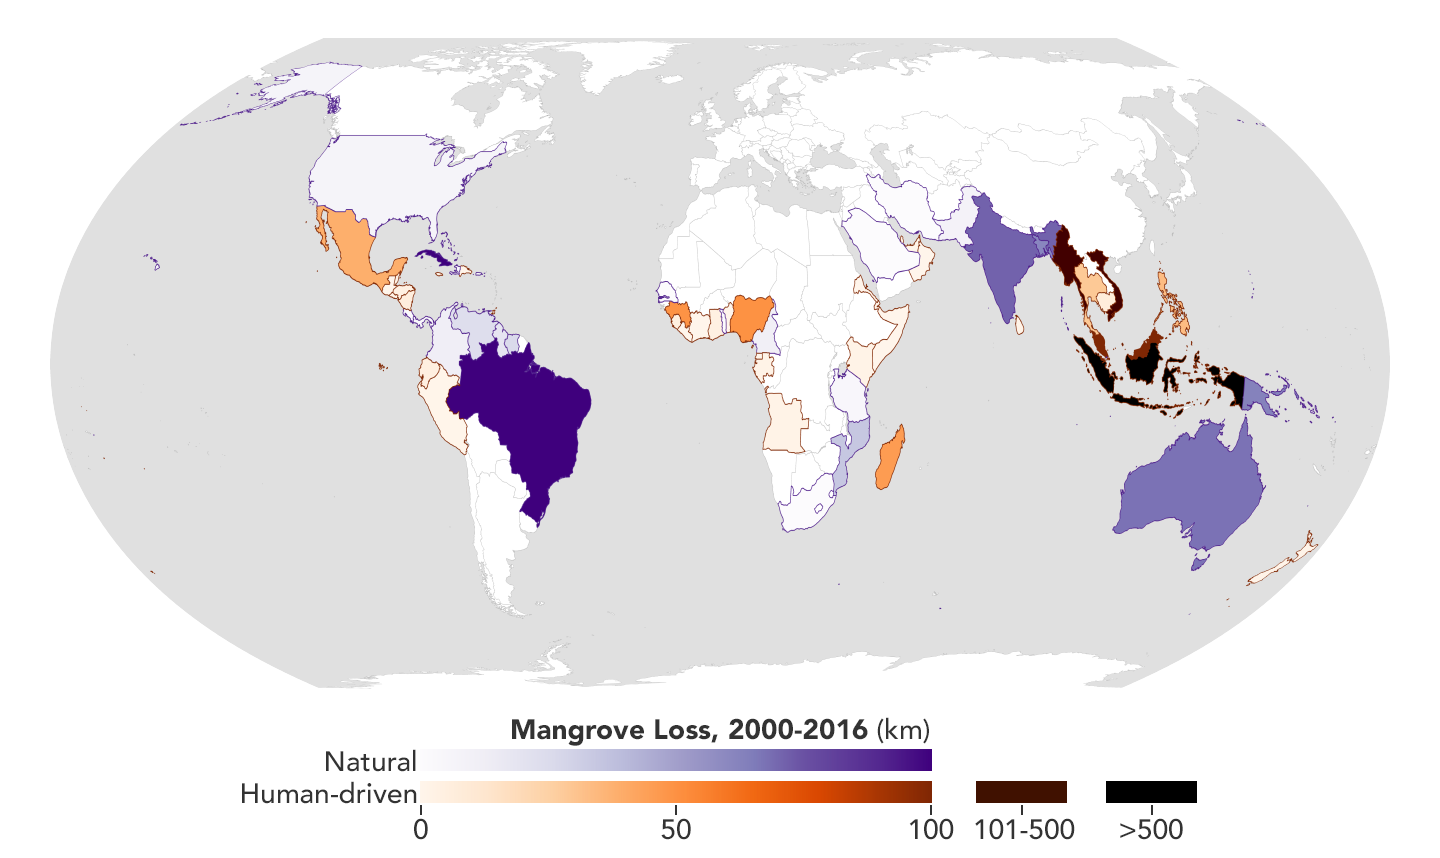 This map shows the location and severity of mangrove habitat loss, measured in kilometers, caused by natural and human drivers from 2000 to 2016.